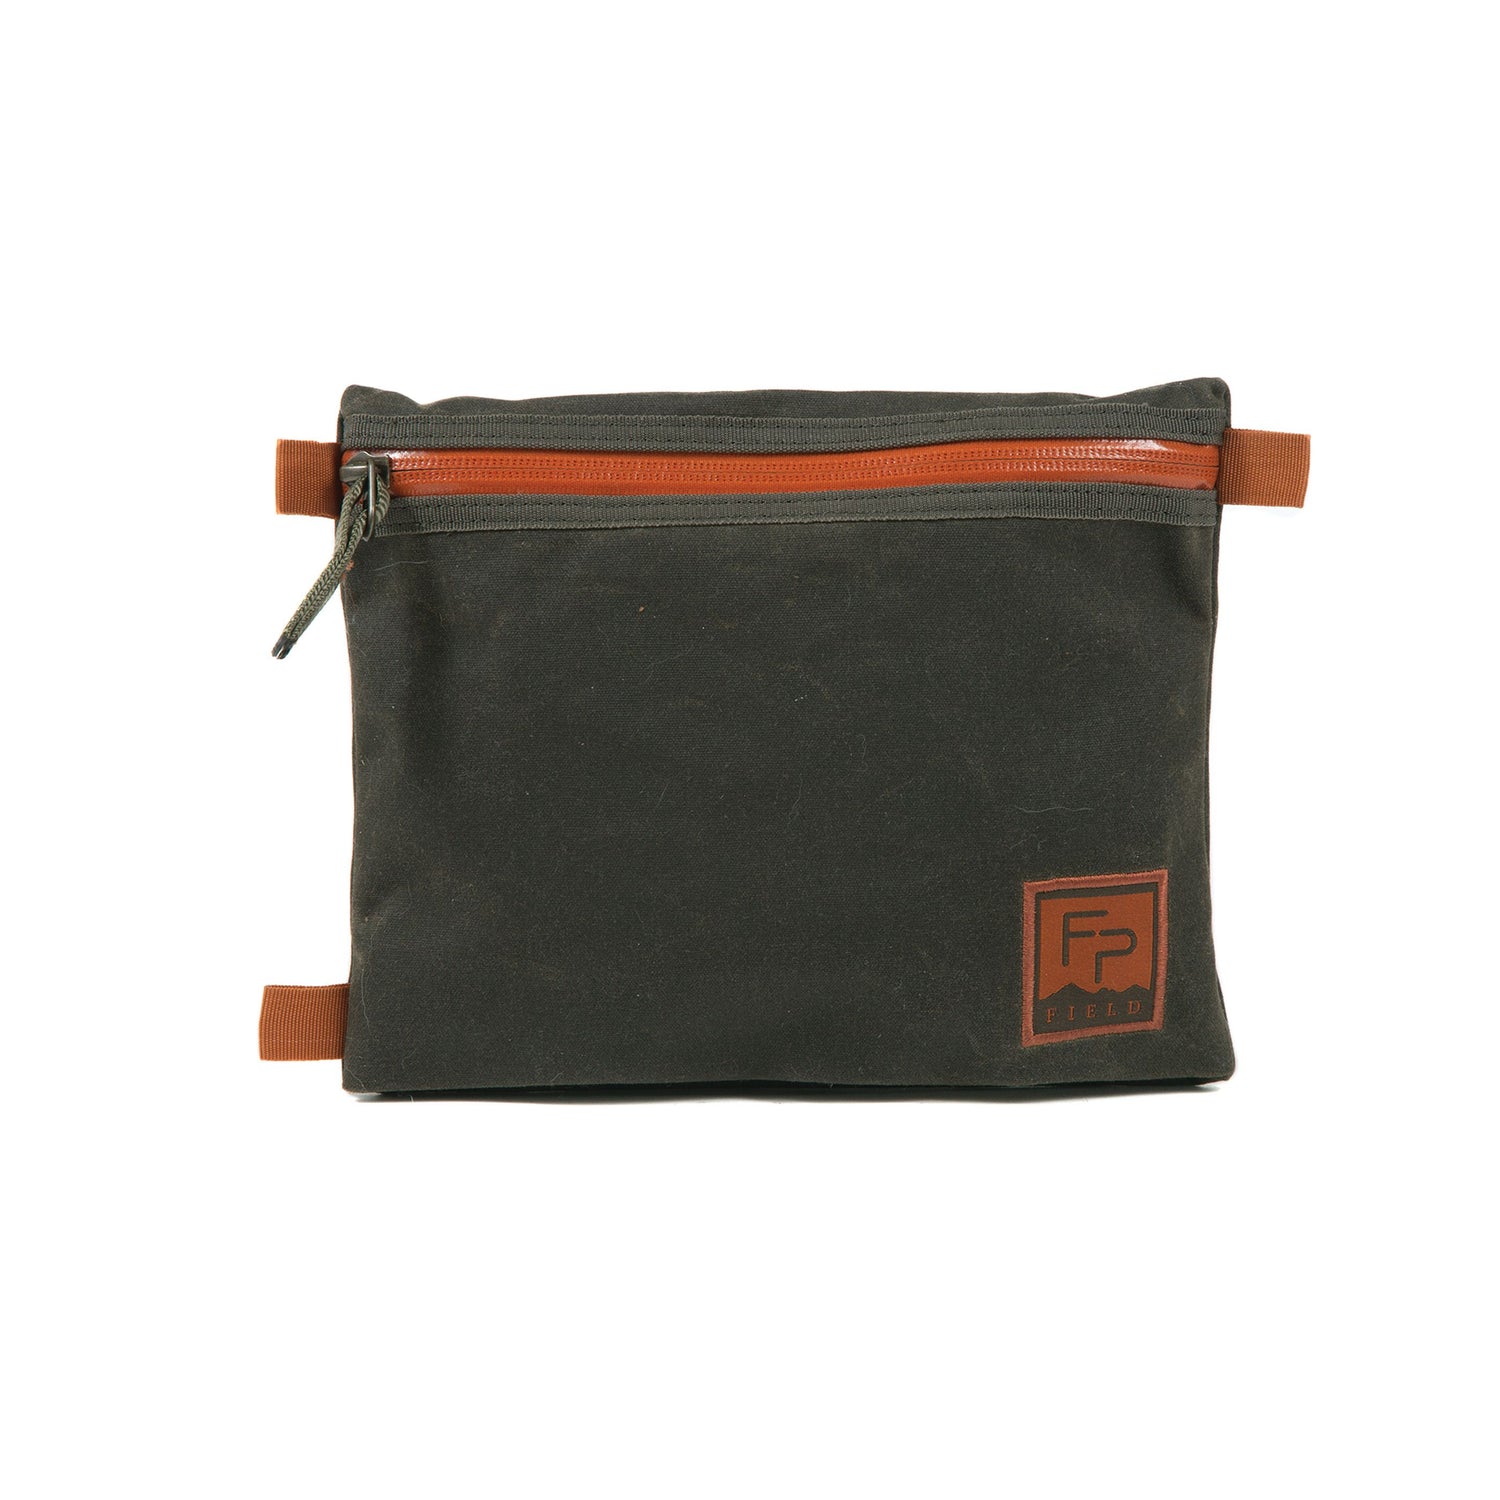  Peat Moss Eagle's Nest Travel Pouch